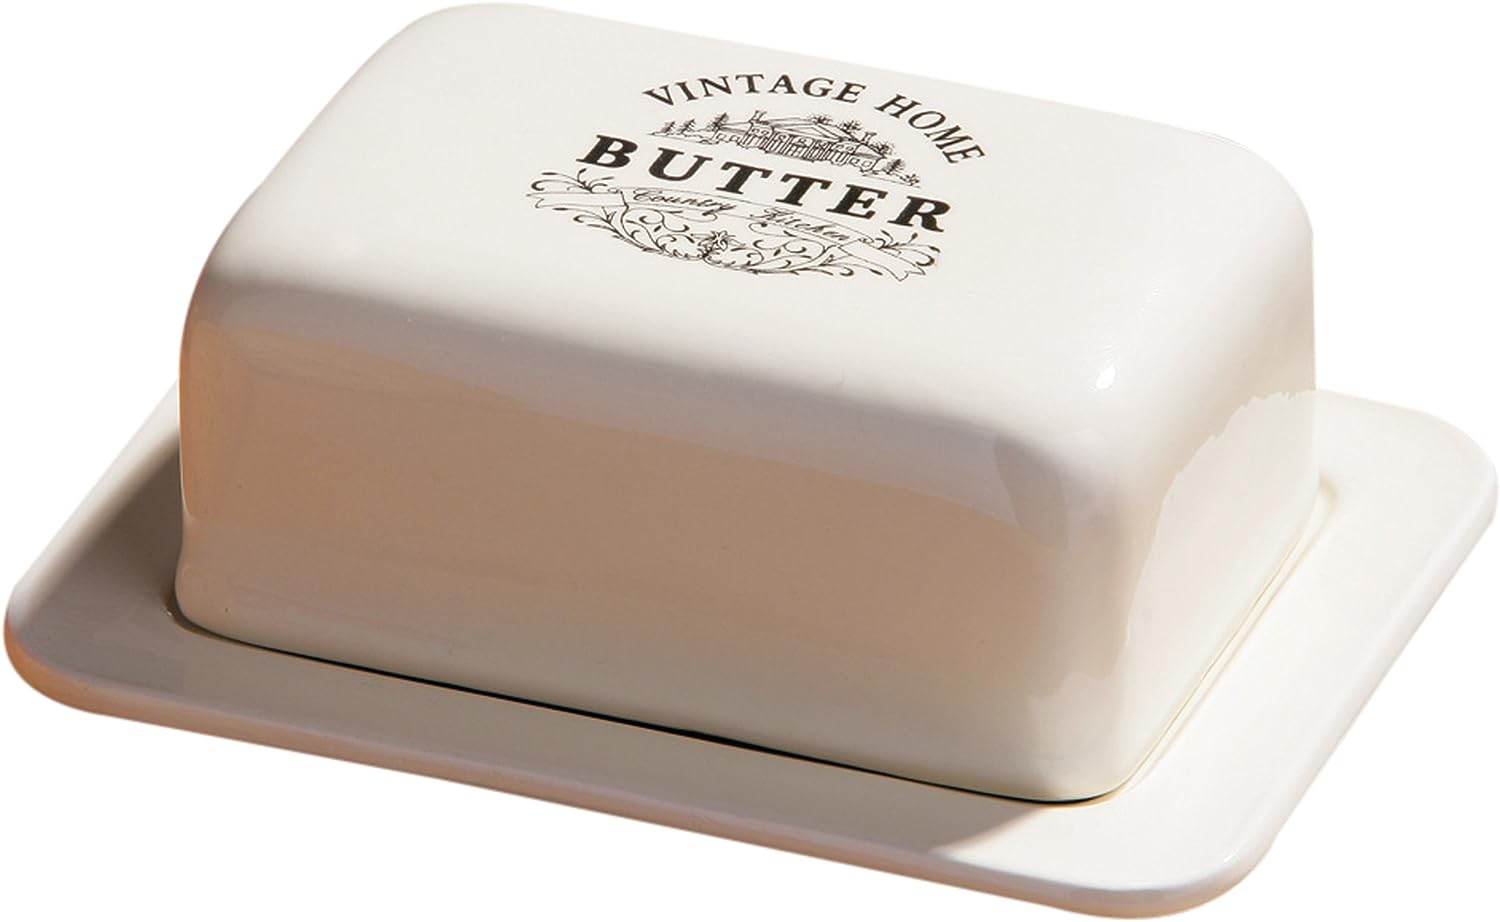 Purchase and today price of ceramic butter dishes